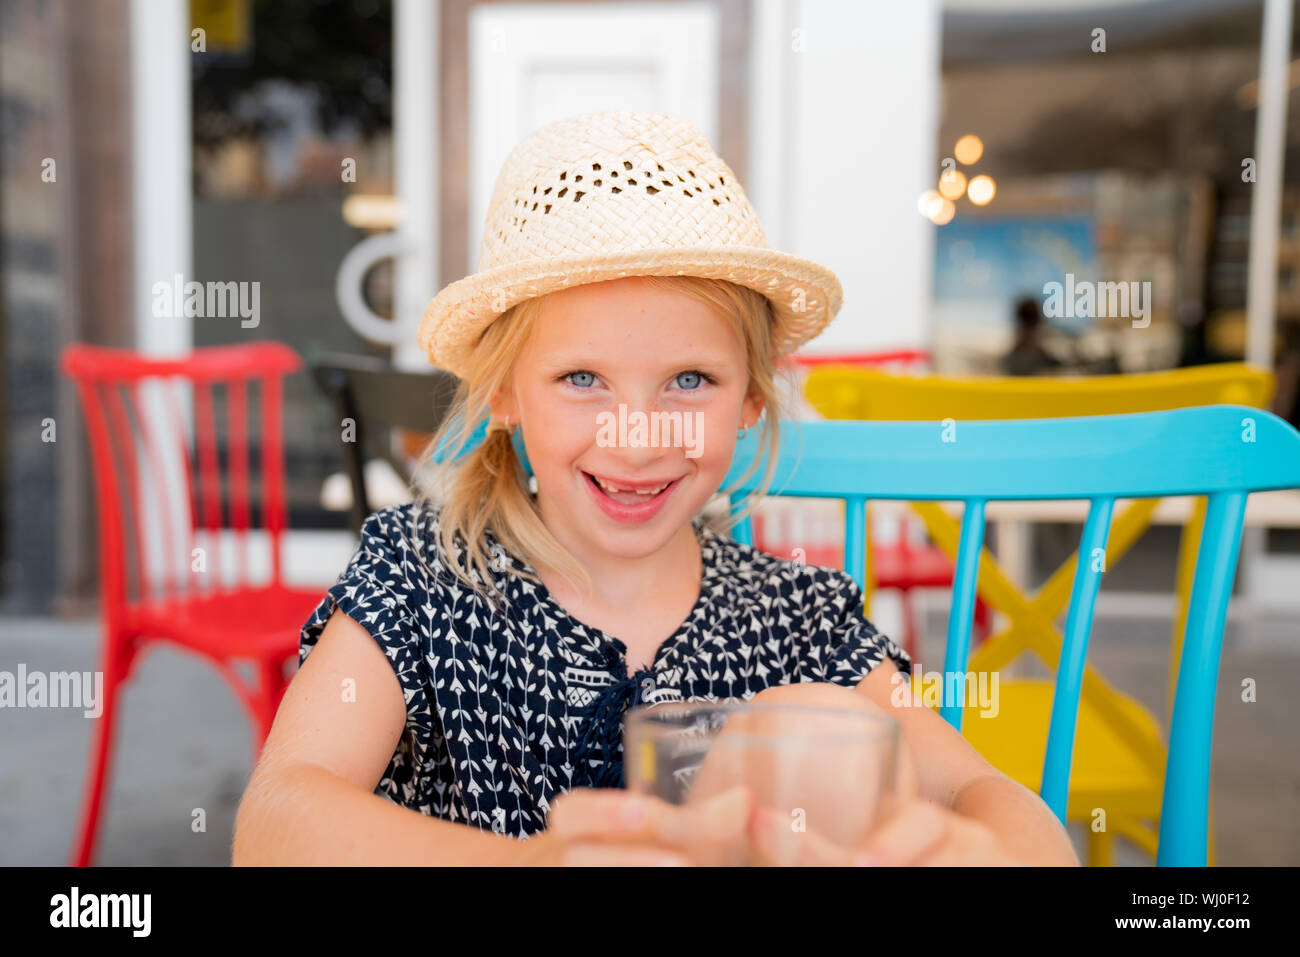 Portrait of a child that is having a good time on a cafe terrace. girl is wearing a hat for the sun, having fun with the family on a cafe terrace. Stock Photo